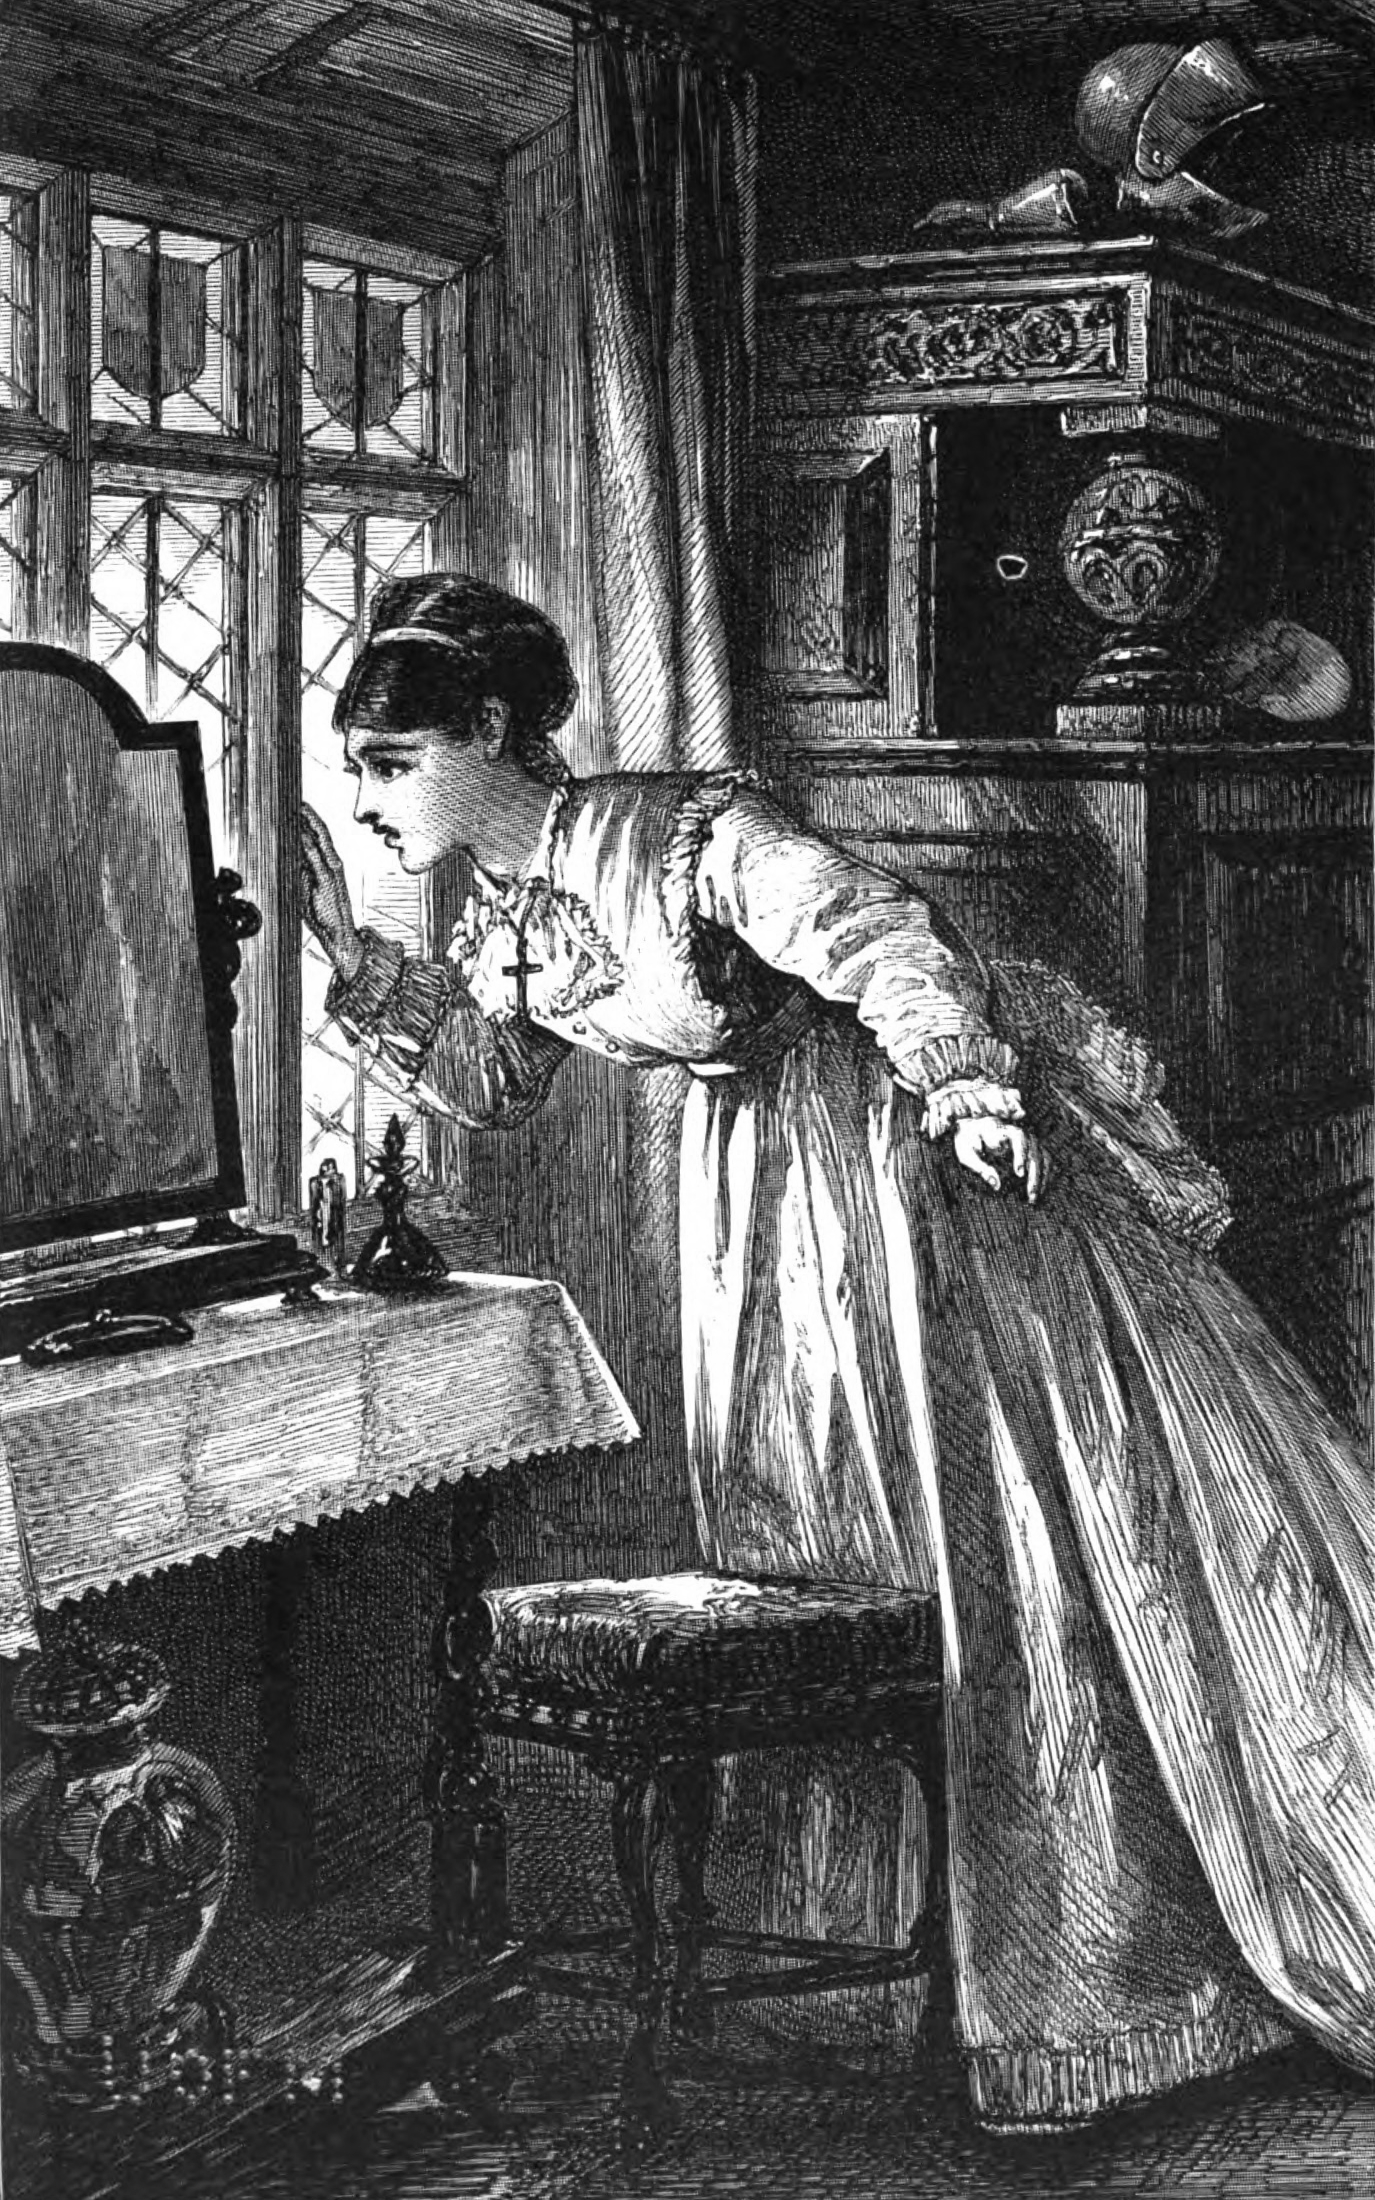 Image Description: Sarah stands near a desk by the window in a room filled with ornate, old furniture. She leans toward the window and gasps in surprise. She wears a frilly dress and a cross necklace hangs around her neck.